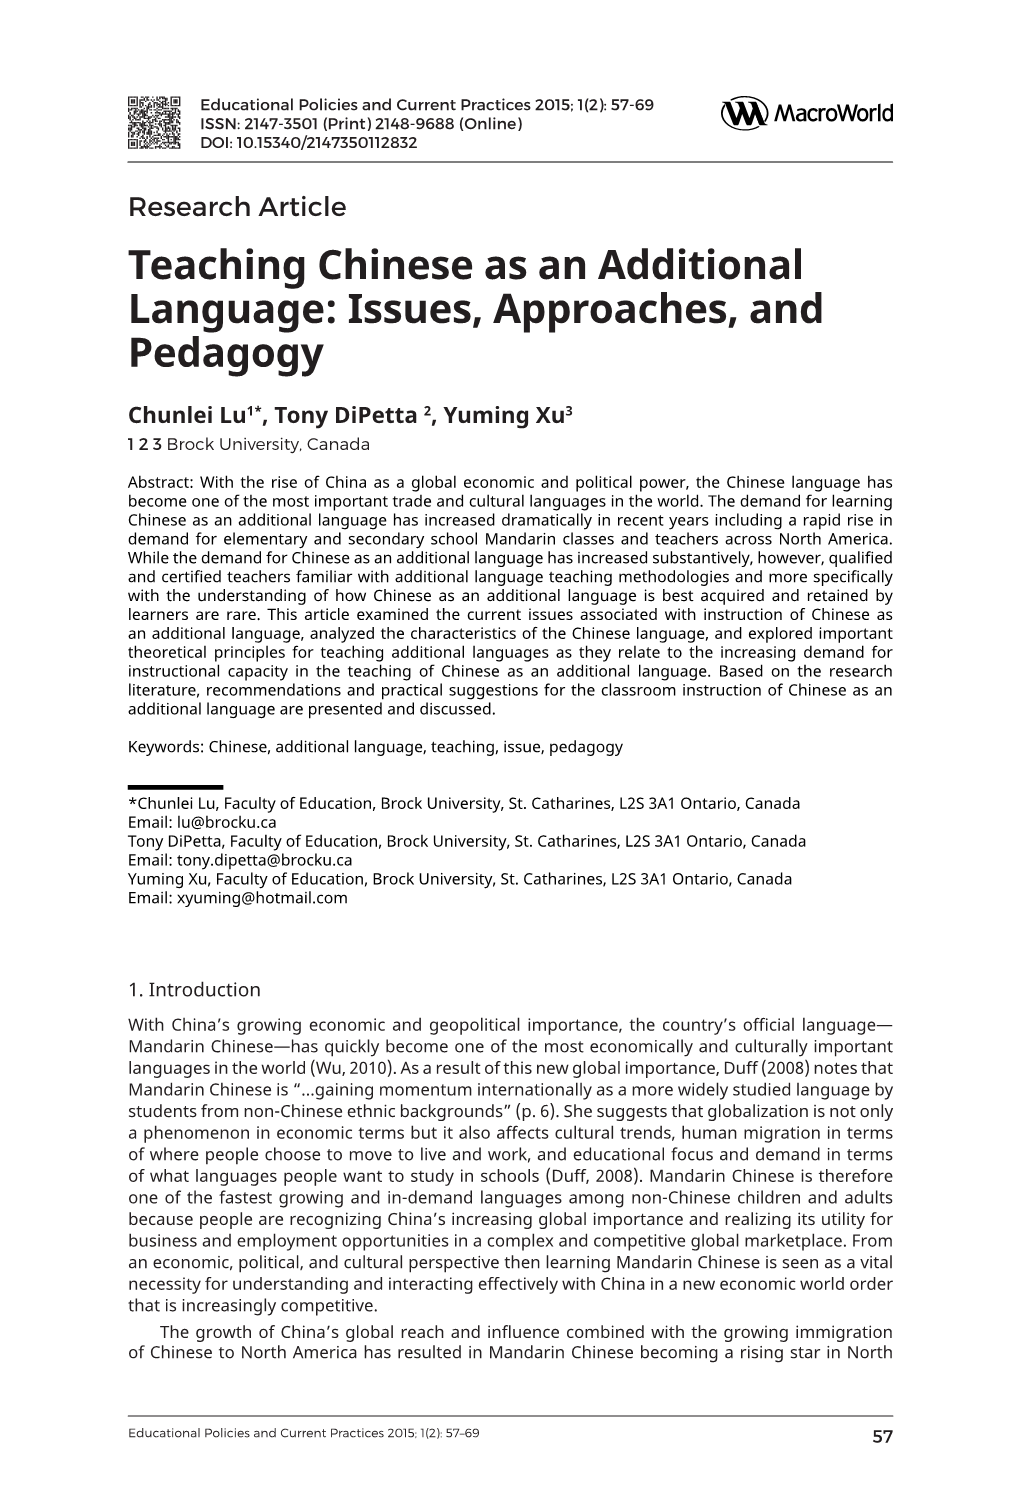 Teaching Chinese As an Additional Language: Issues, Approaches, and Pedagogy